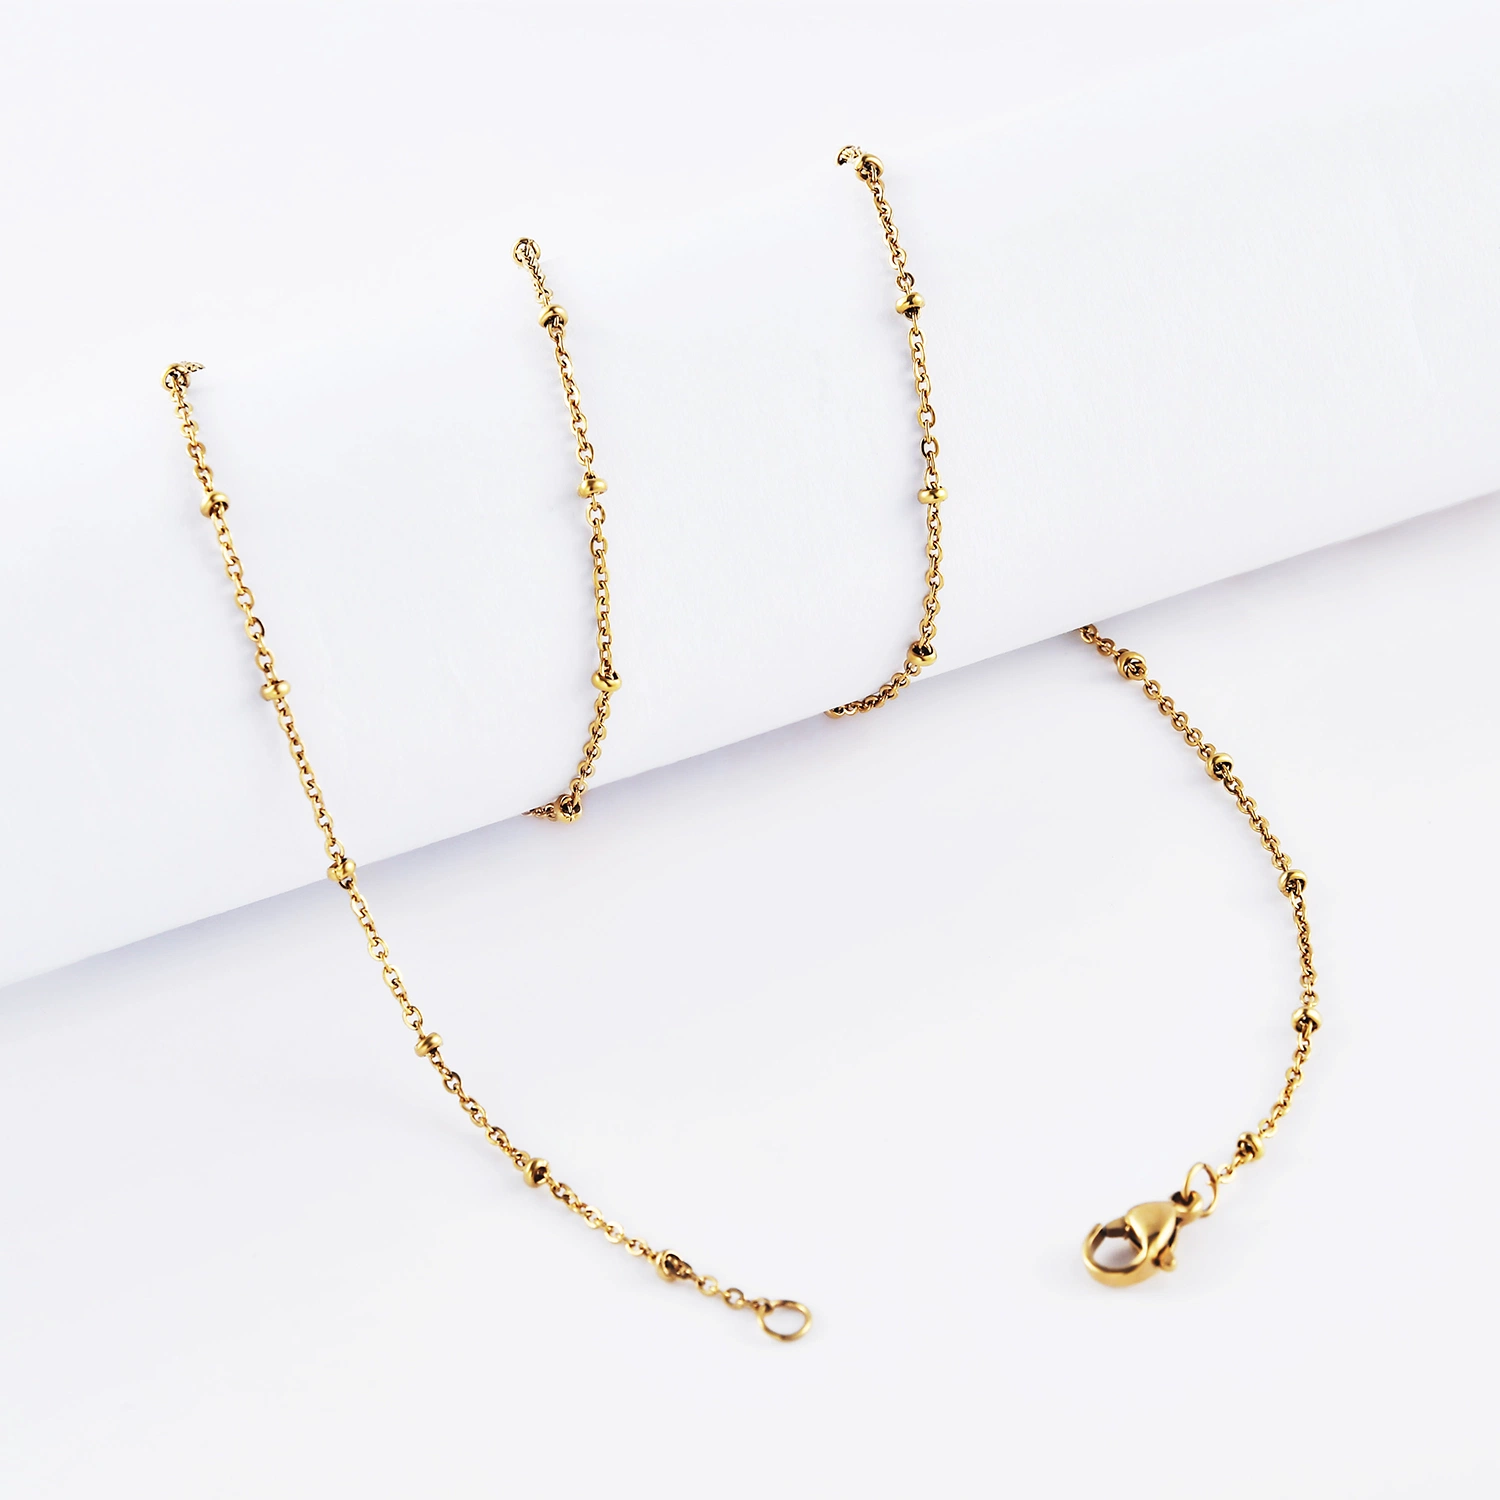 Classic Gold Plated Stainless Steel Flat Cable Chain Necklace Bracelet Anklet Fashion Jewelry with Beads